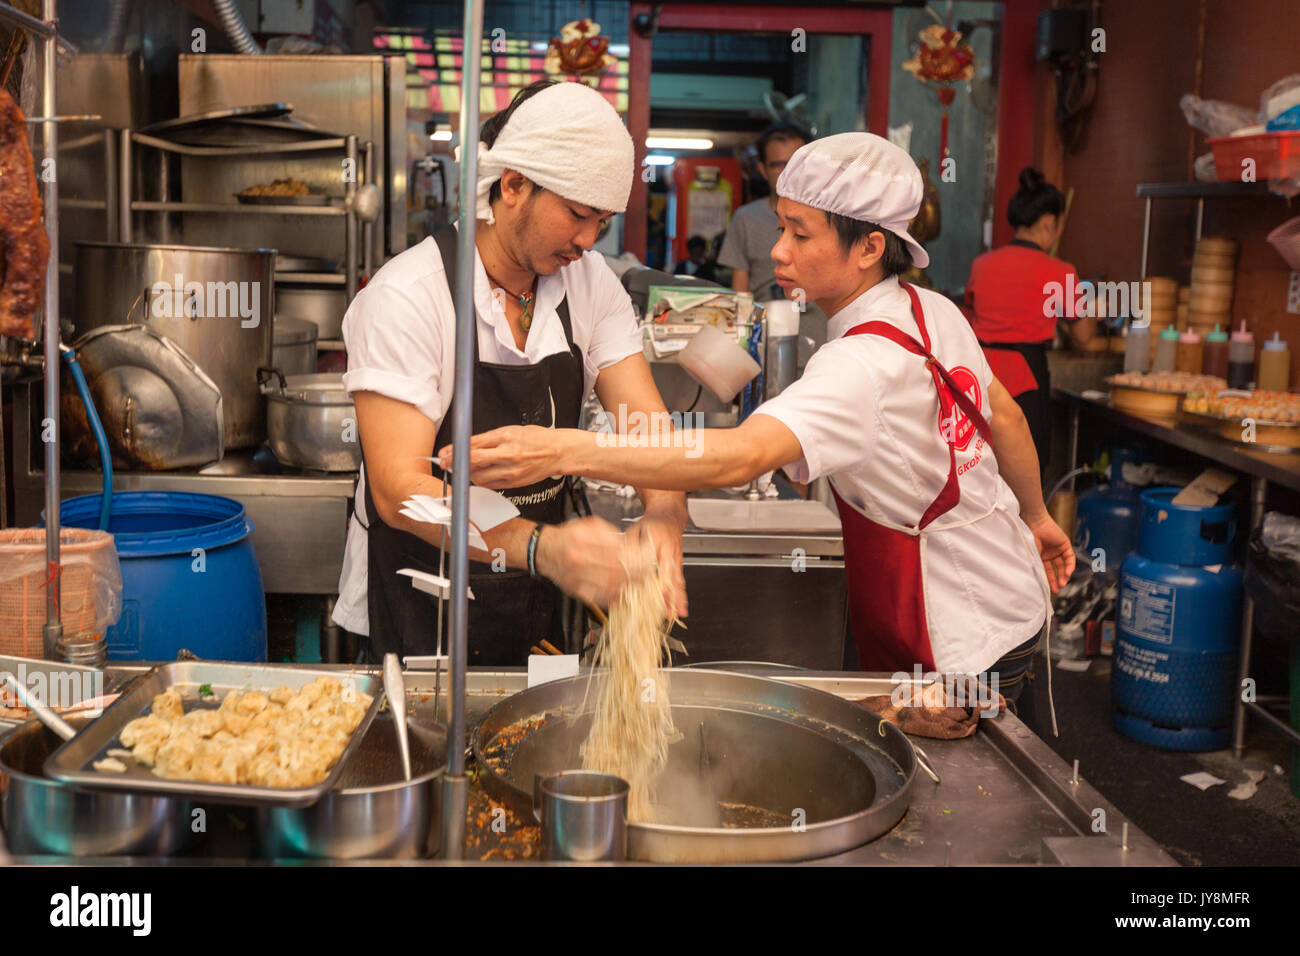 Cooking noodles for sale in Chinatown, Bangkok, Thailand Stock Photo